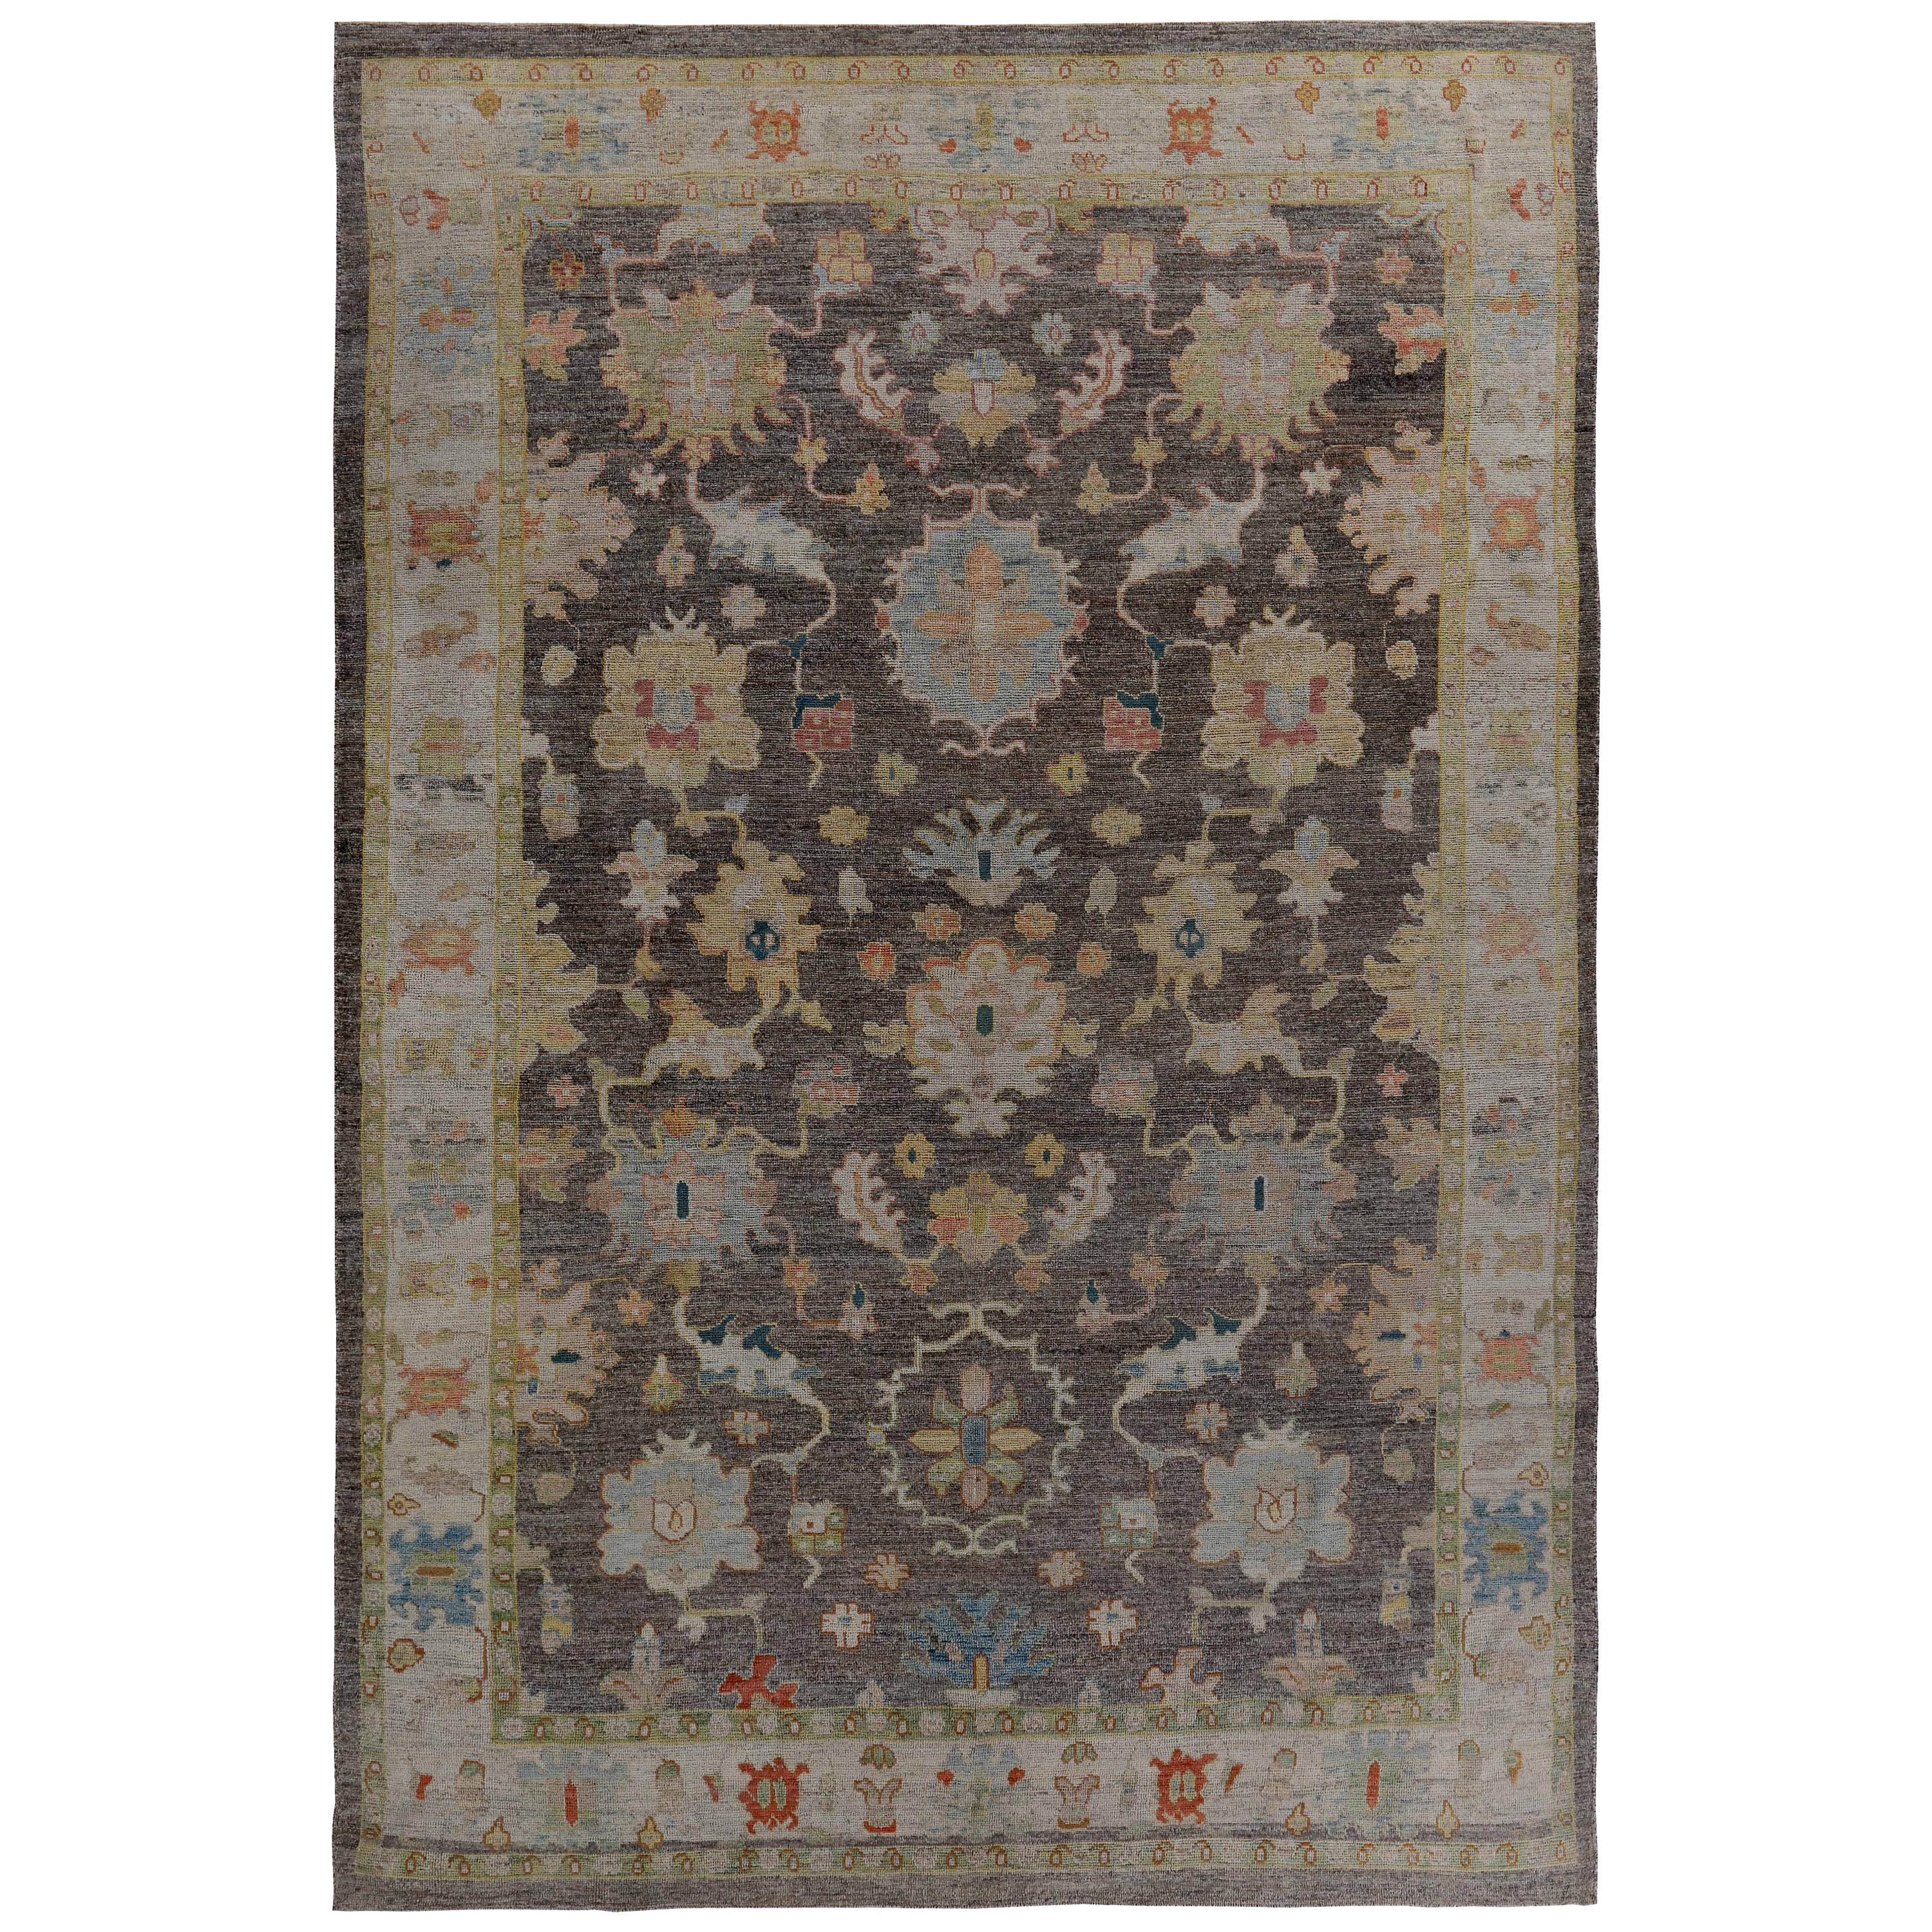 Turkish Oushak Rug with Blue and Gold Floral Details on Brown and Ivory Field